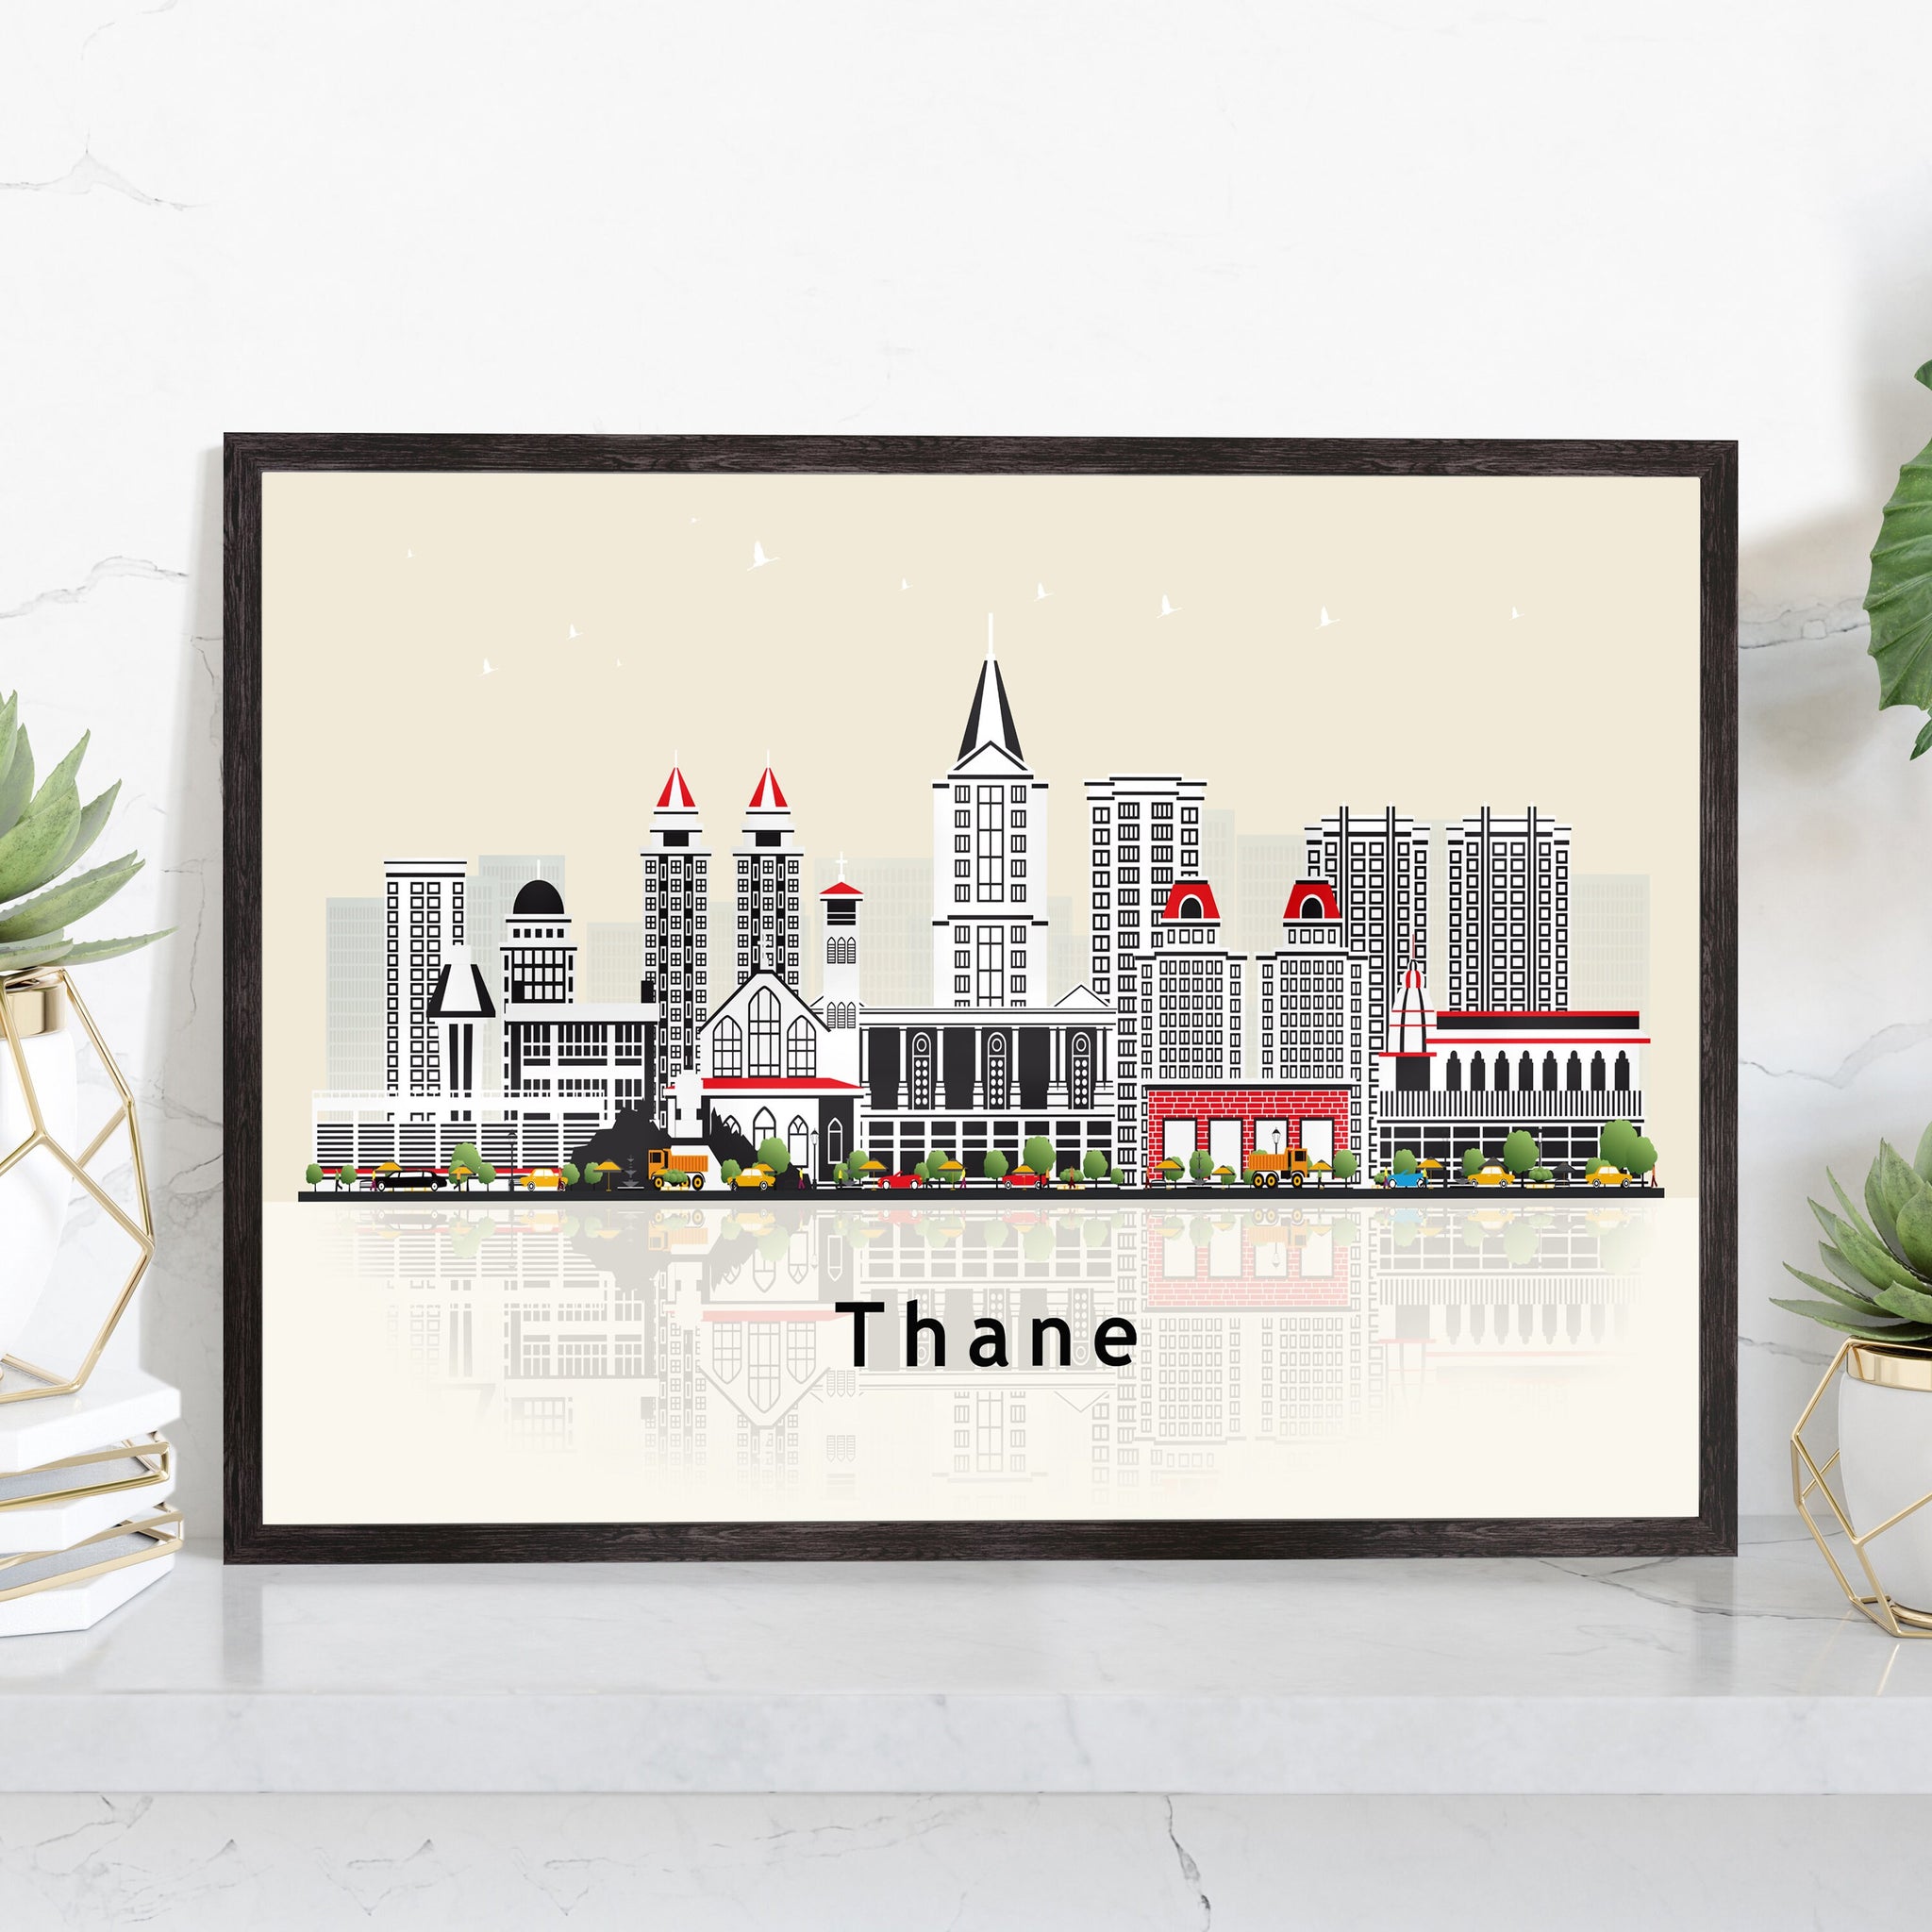 THANE INDIA Illustration skyline poster, Modern skyline cityscape poster, India city skyline landmark map poster, Home wall decoration